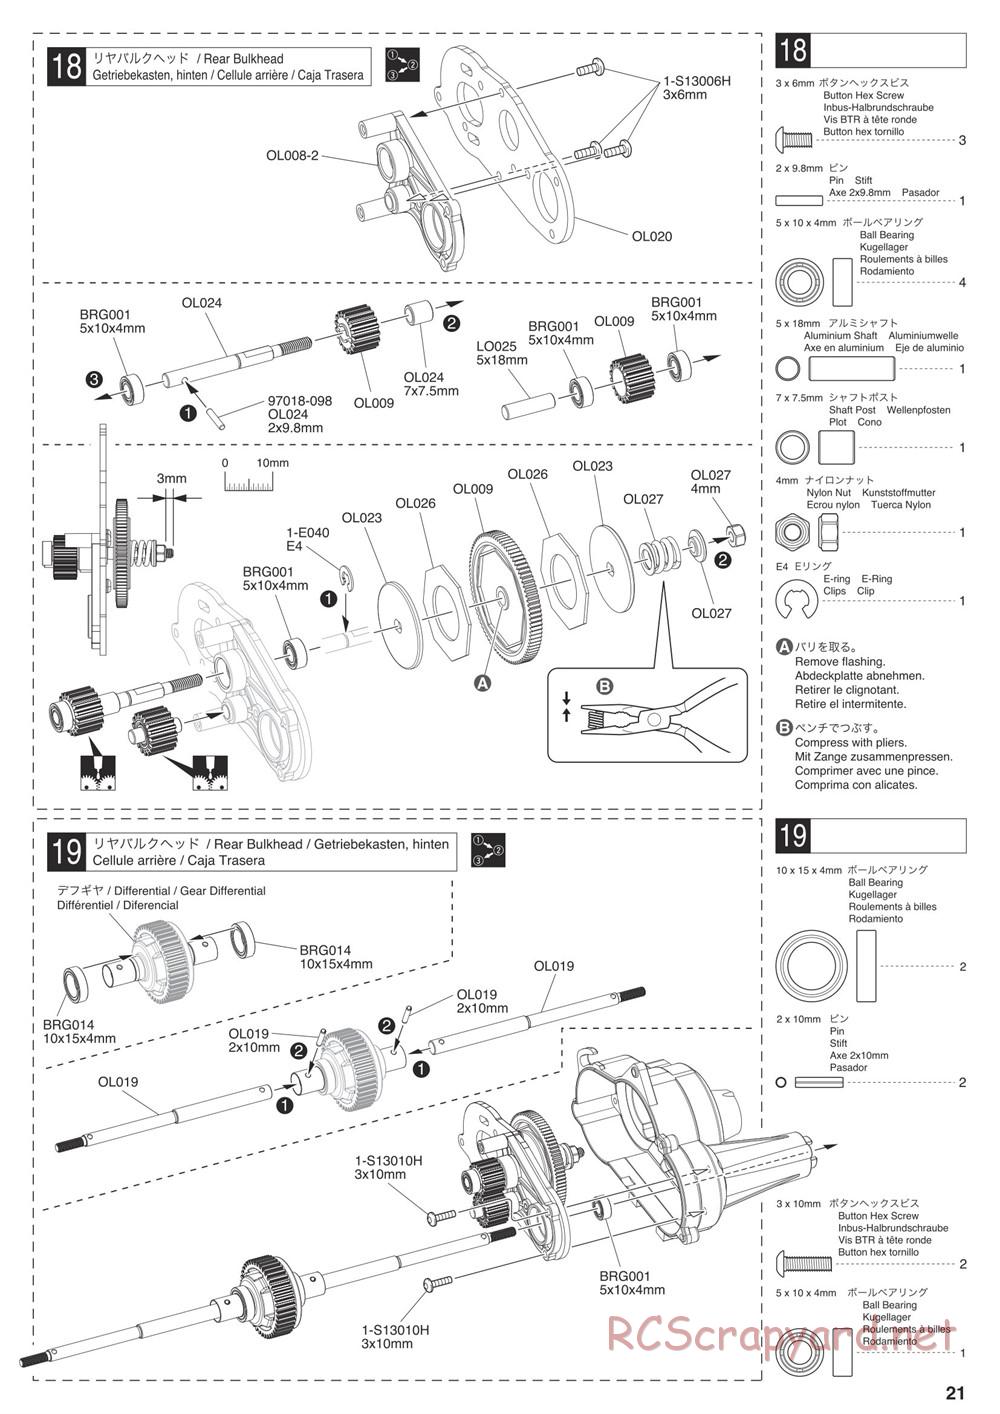 Kyosho - Outlaw Rampage Pro - Manual - Page 21